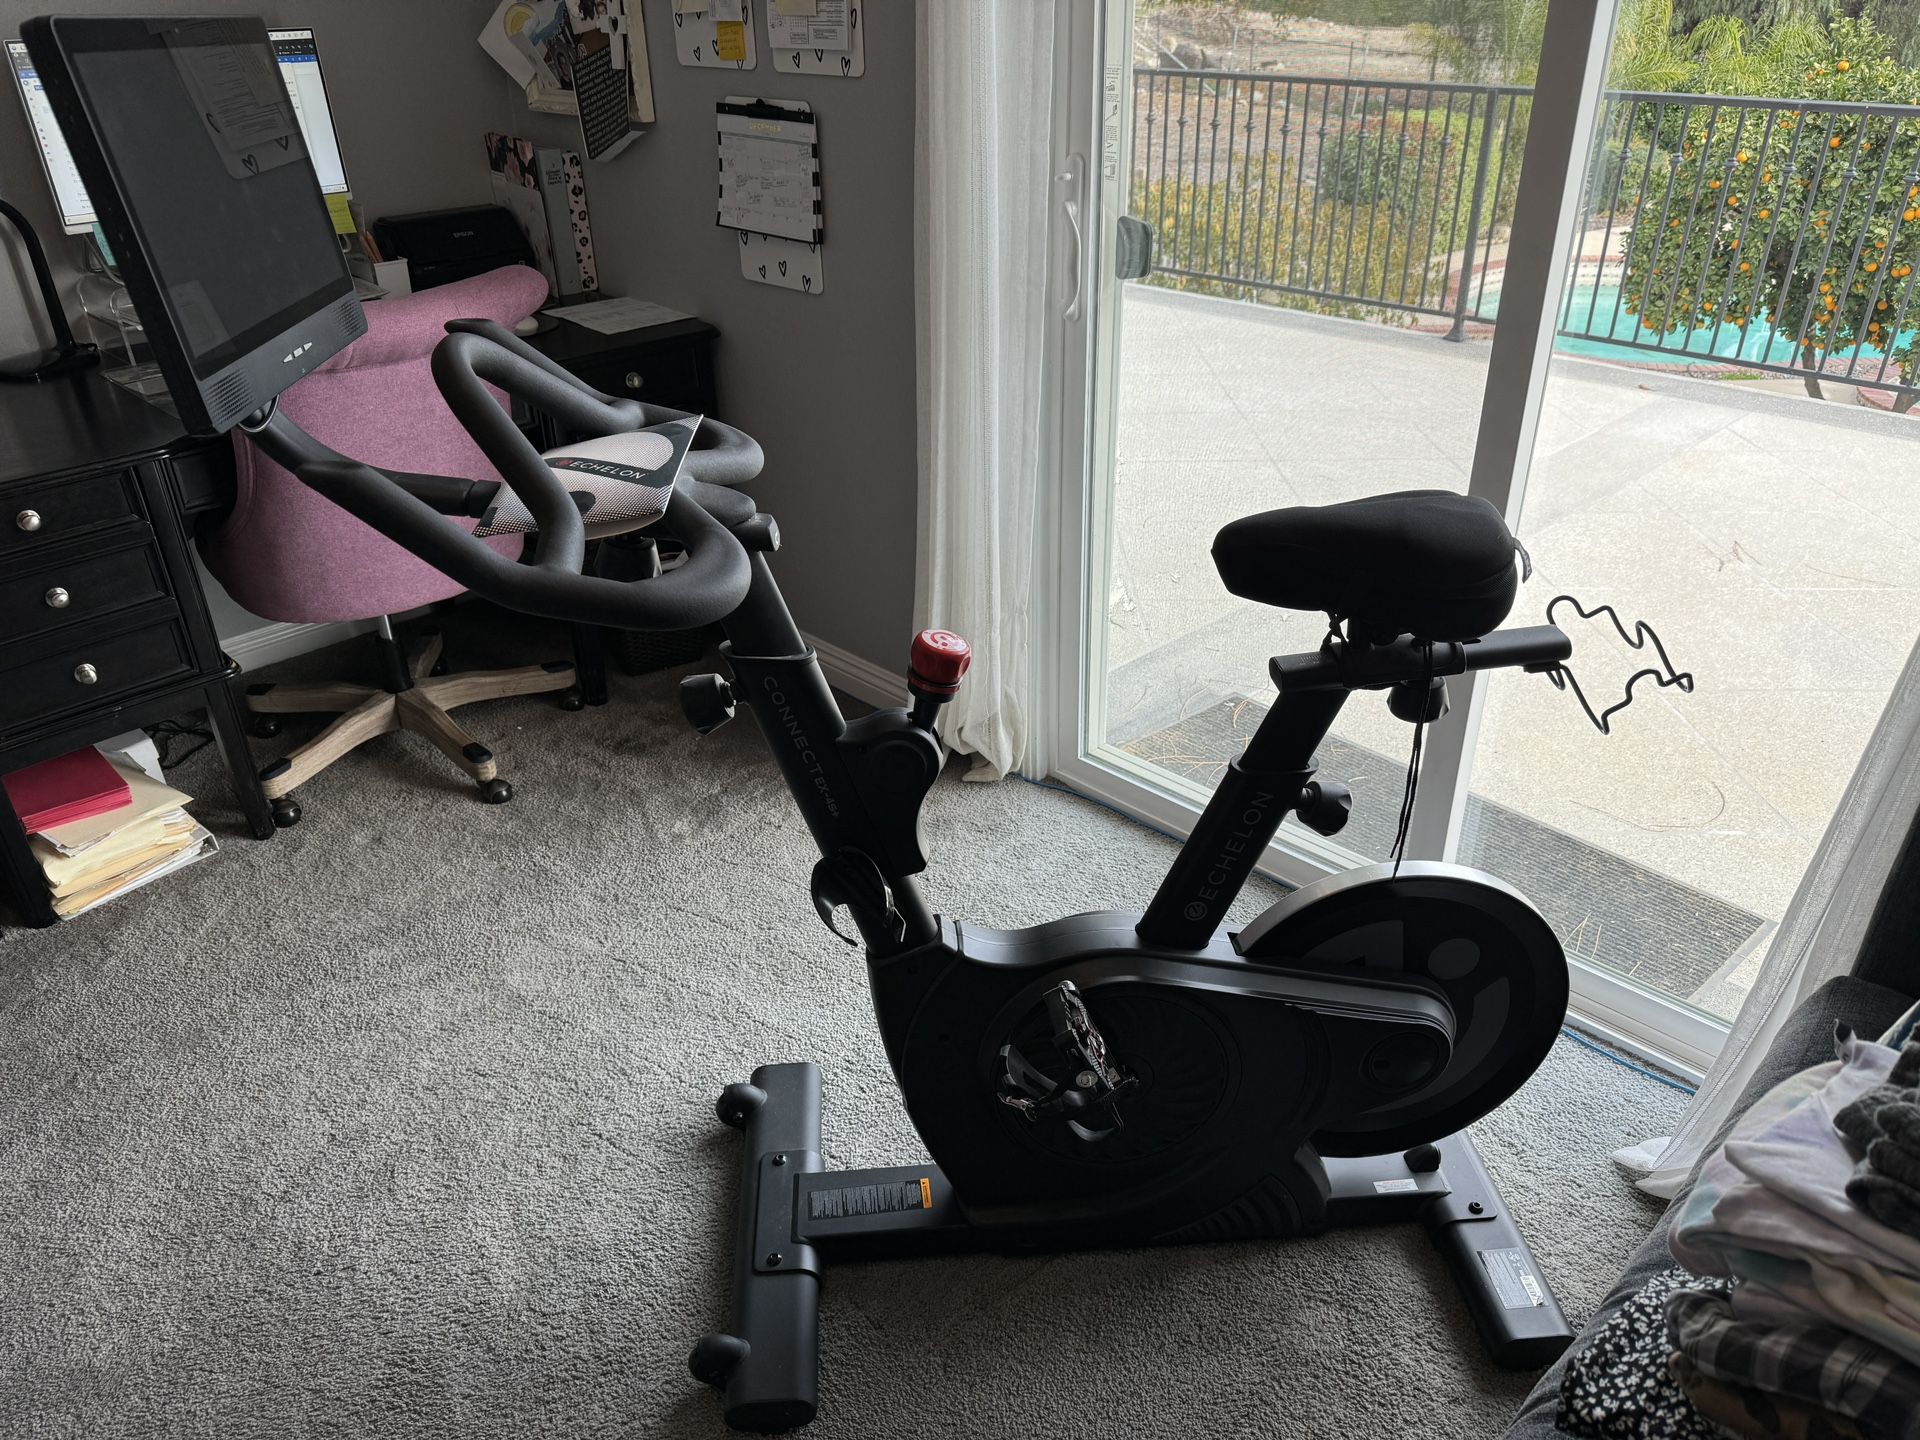 Exercise bike Used 7 Times 